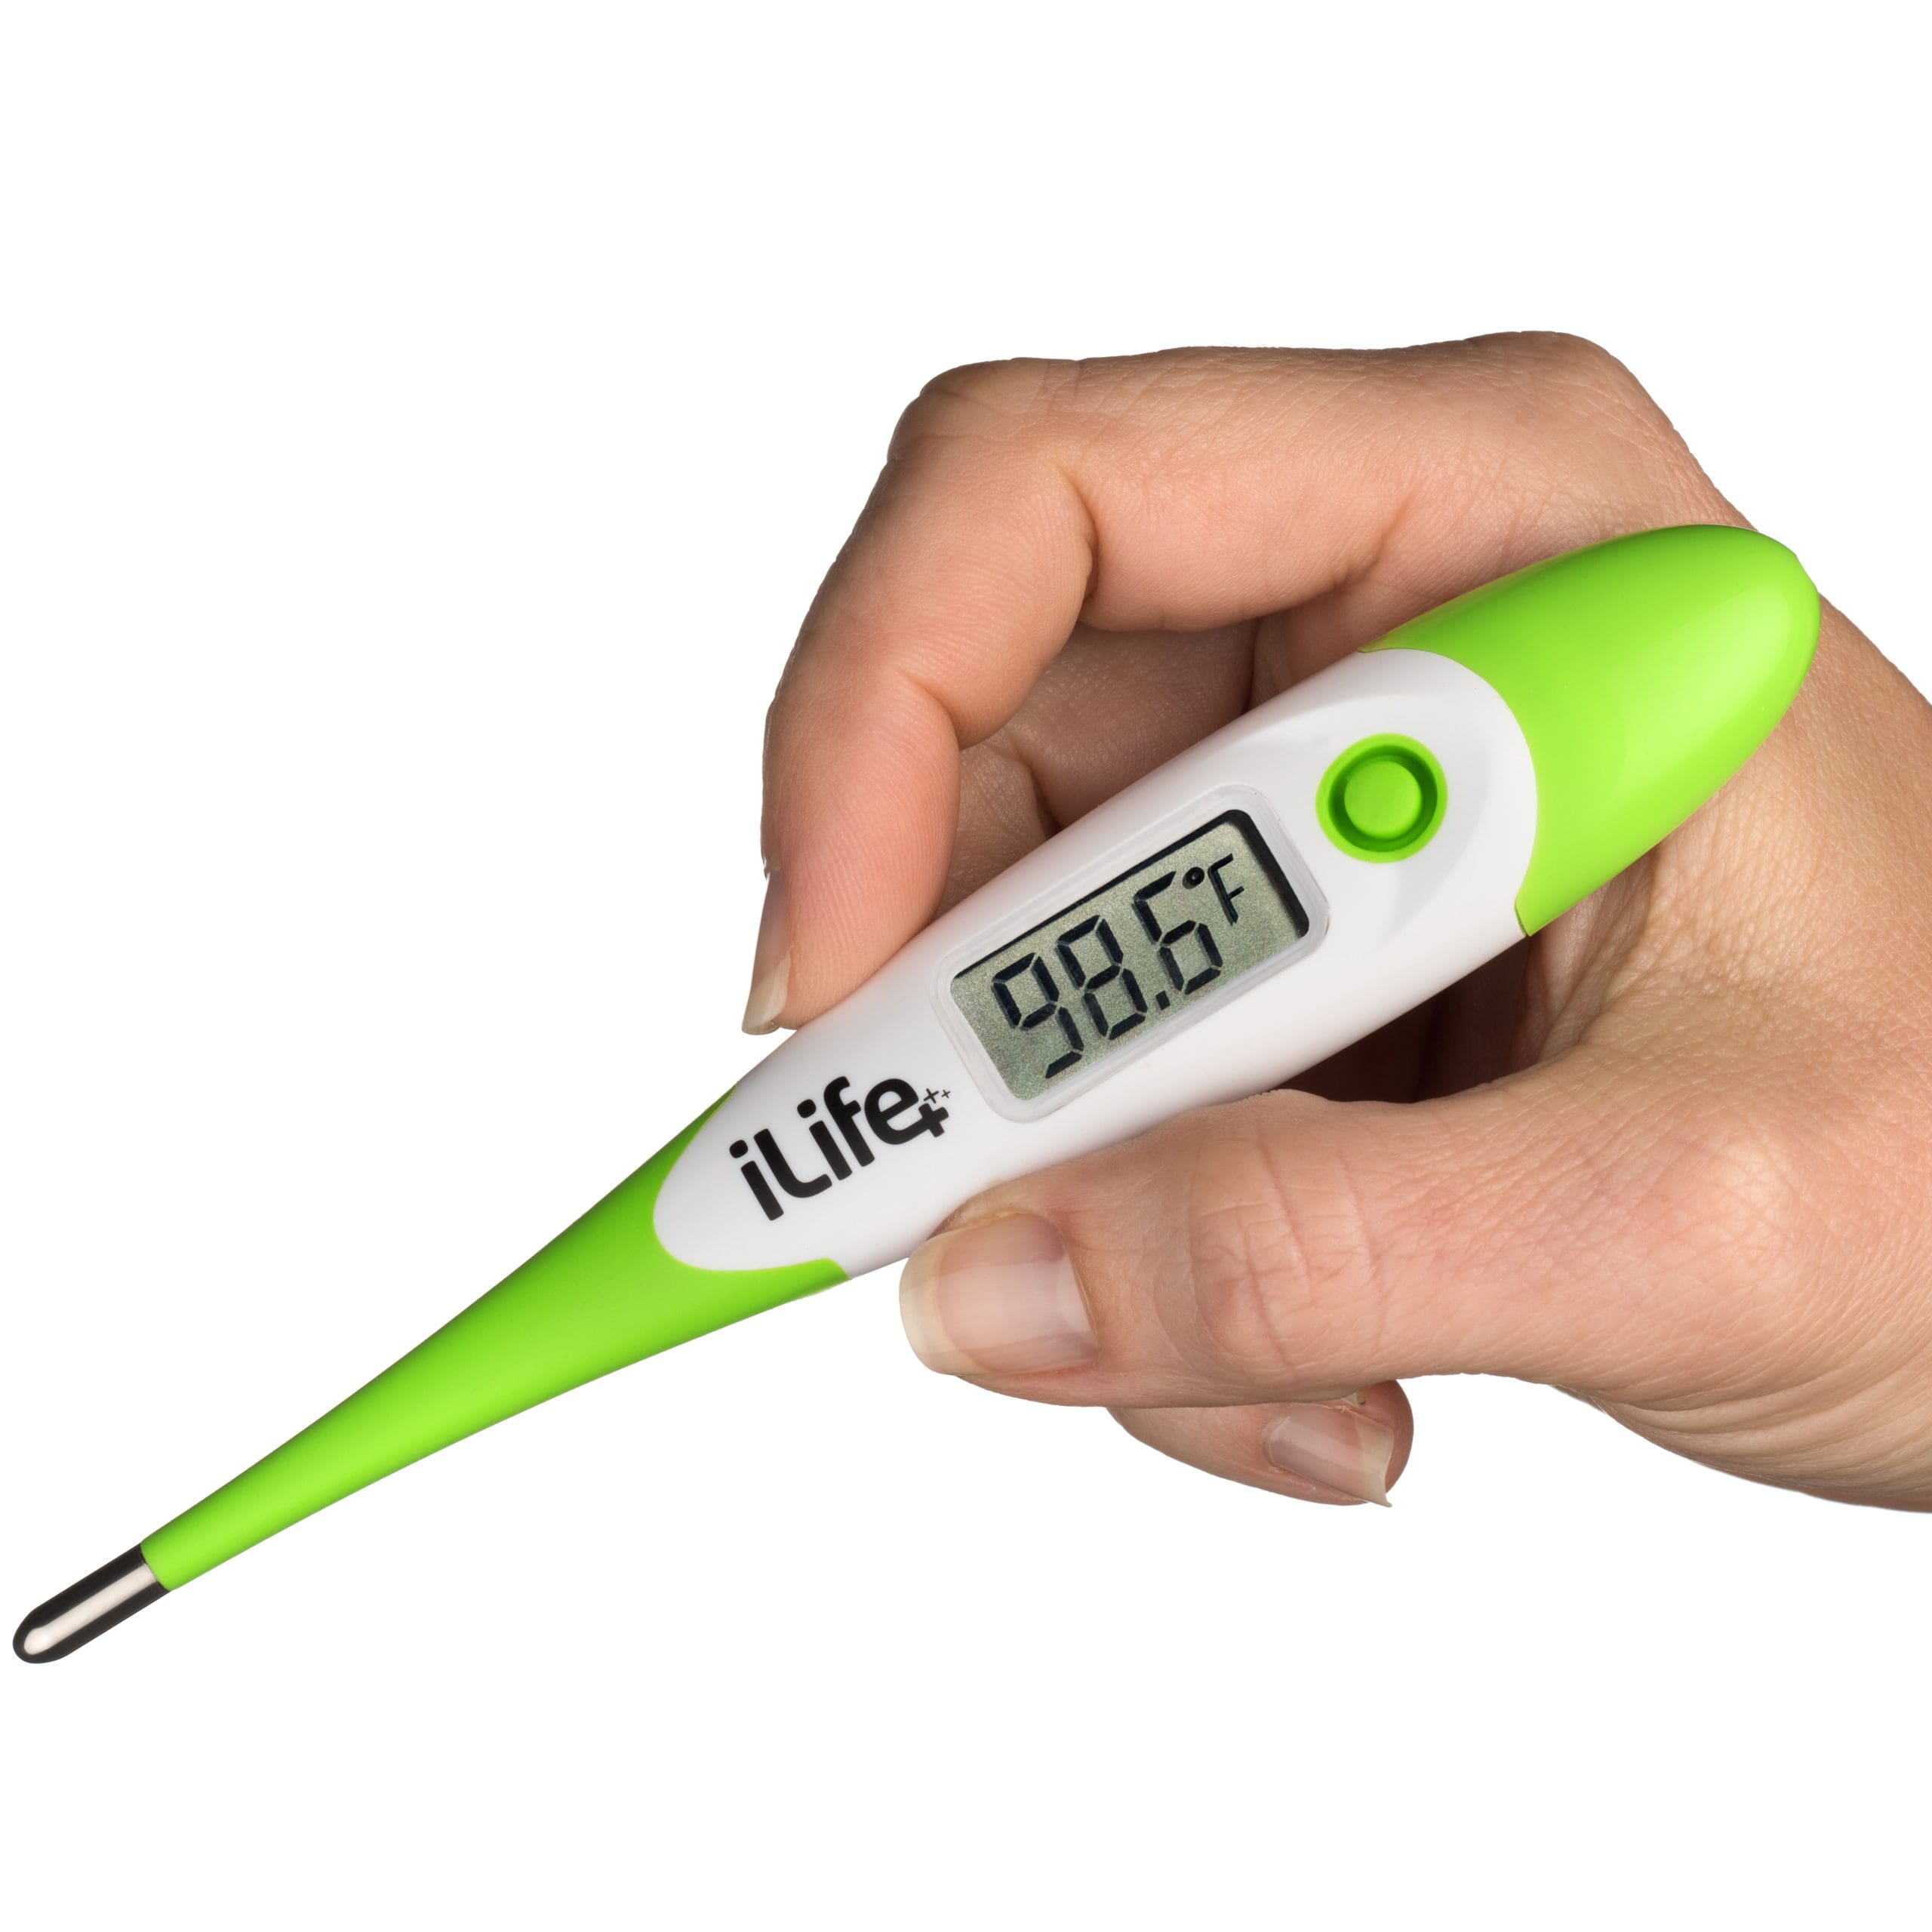 A photo of a hand model holding a digital thermometer.